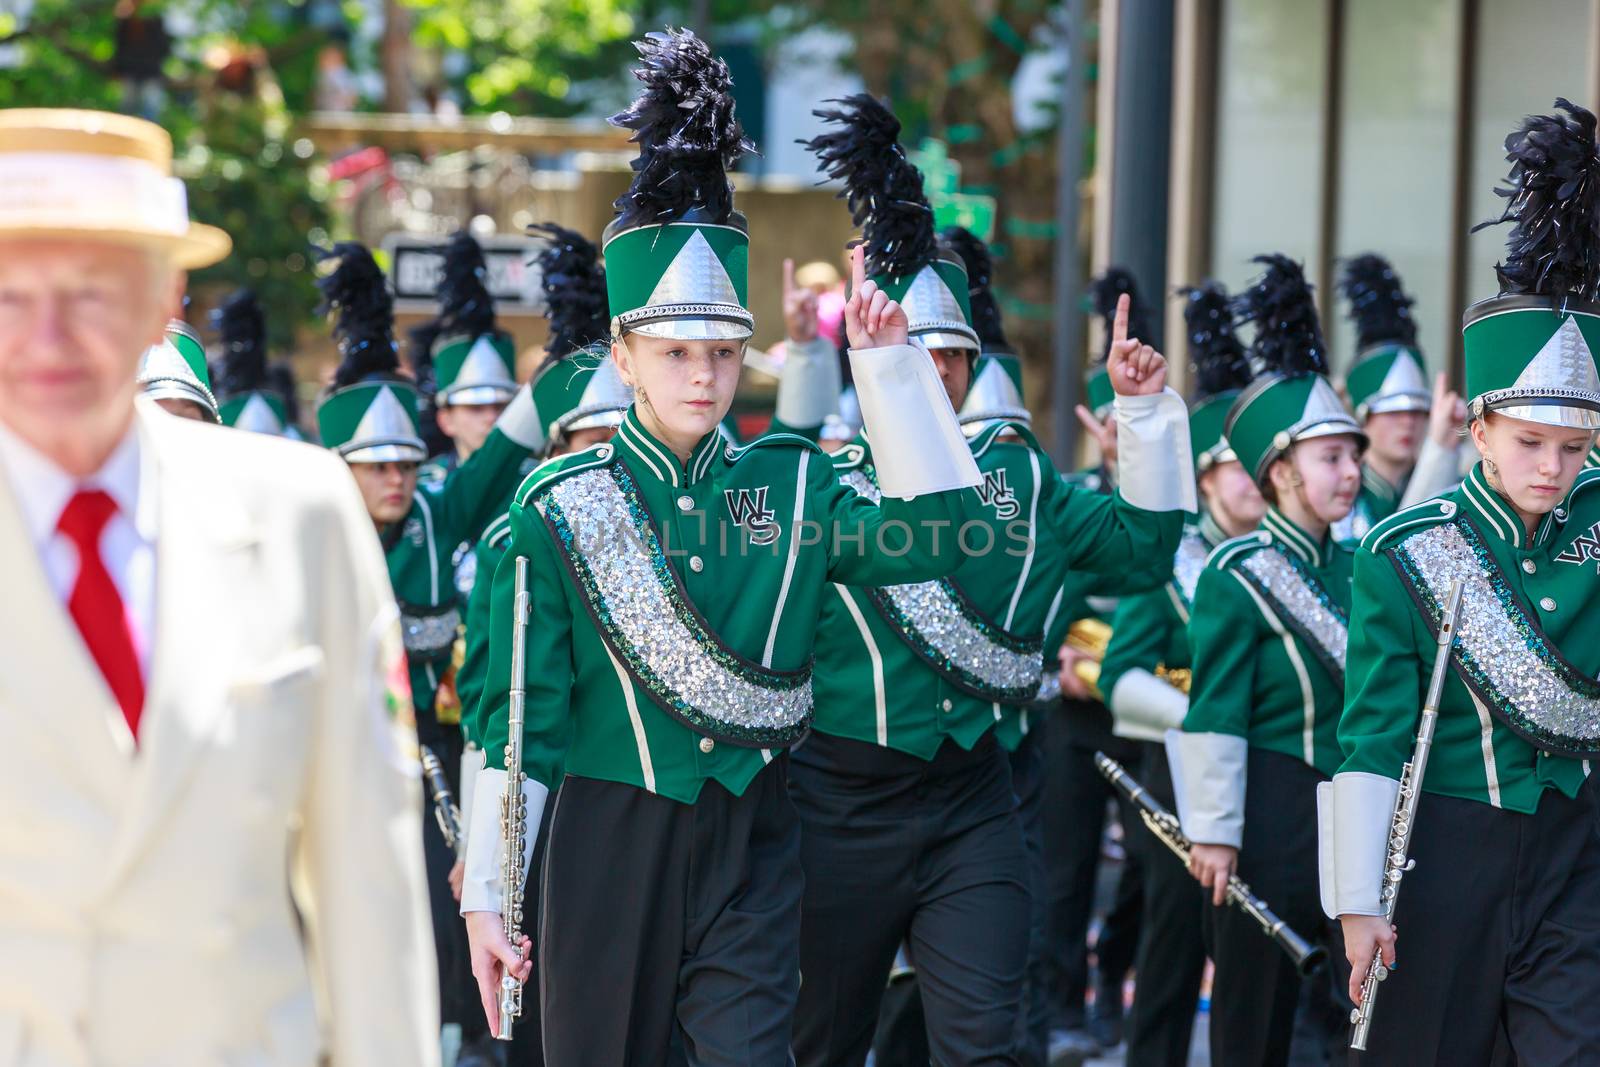 Portland, Oregon, USA - JUNE 7, 2014: West Salem High School Marching Band in Grand floral parade through Portland downtown.